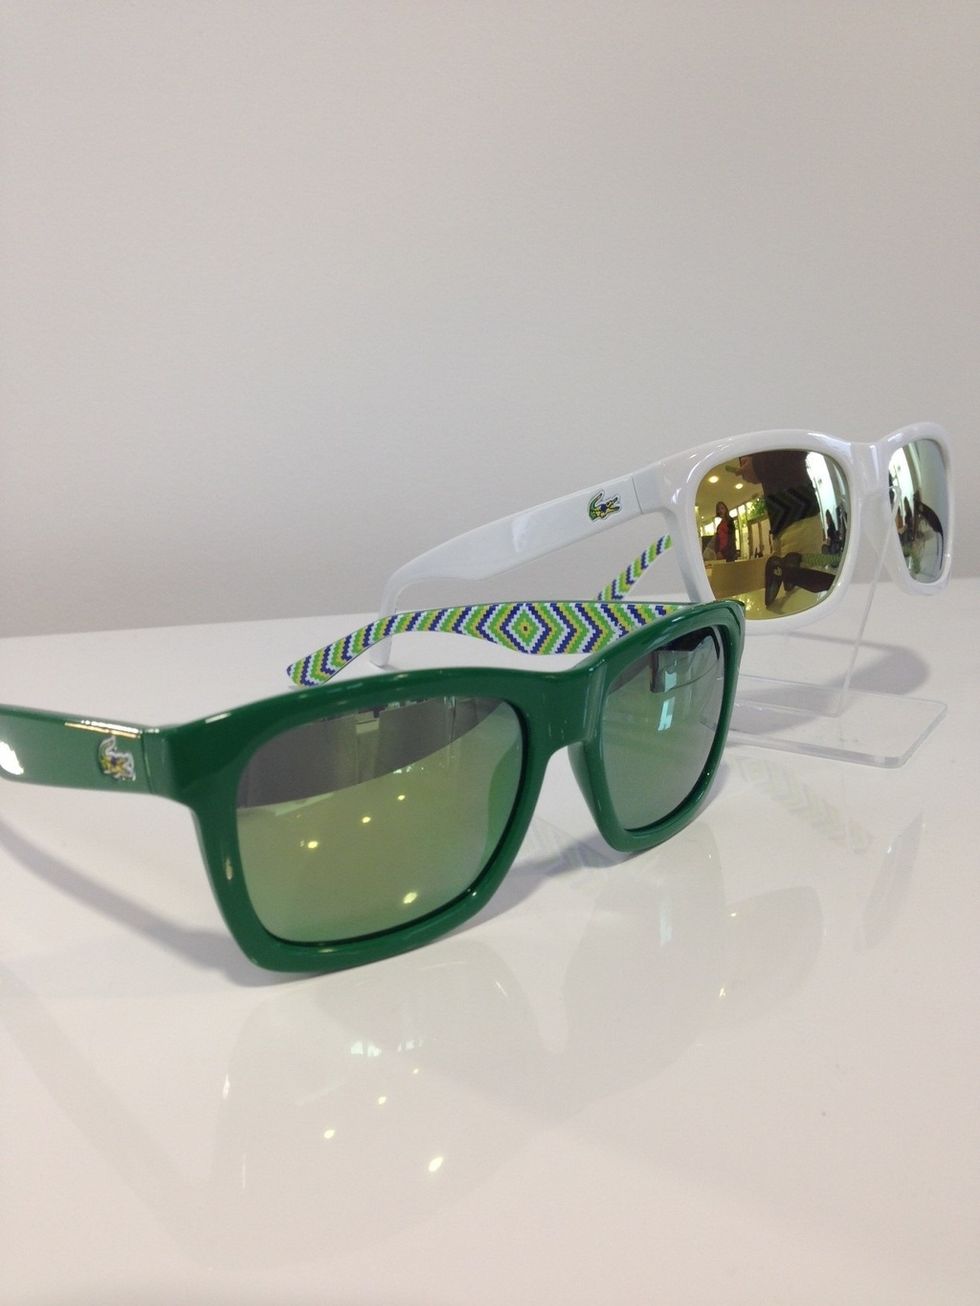 Eyewear, Glasses, Goggles, Vision care, Green, Glass, Yellow, Sunglasses, Personal protective equipment, Reflection, 